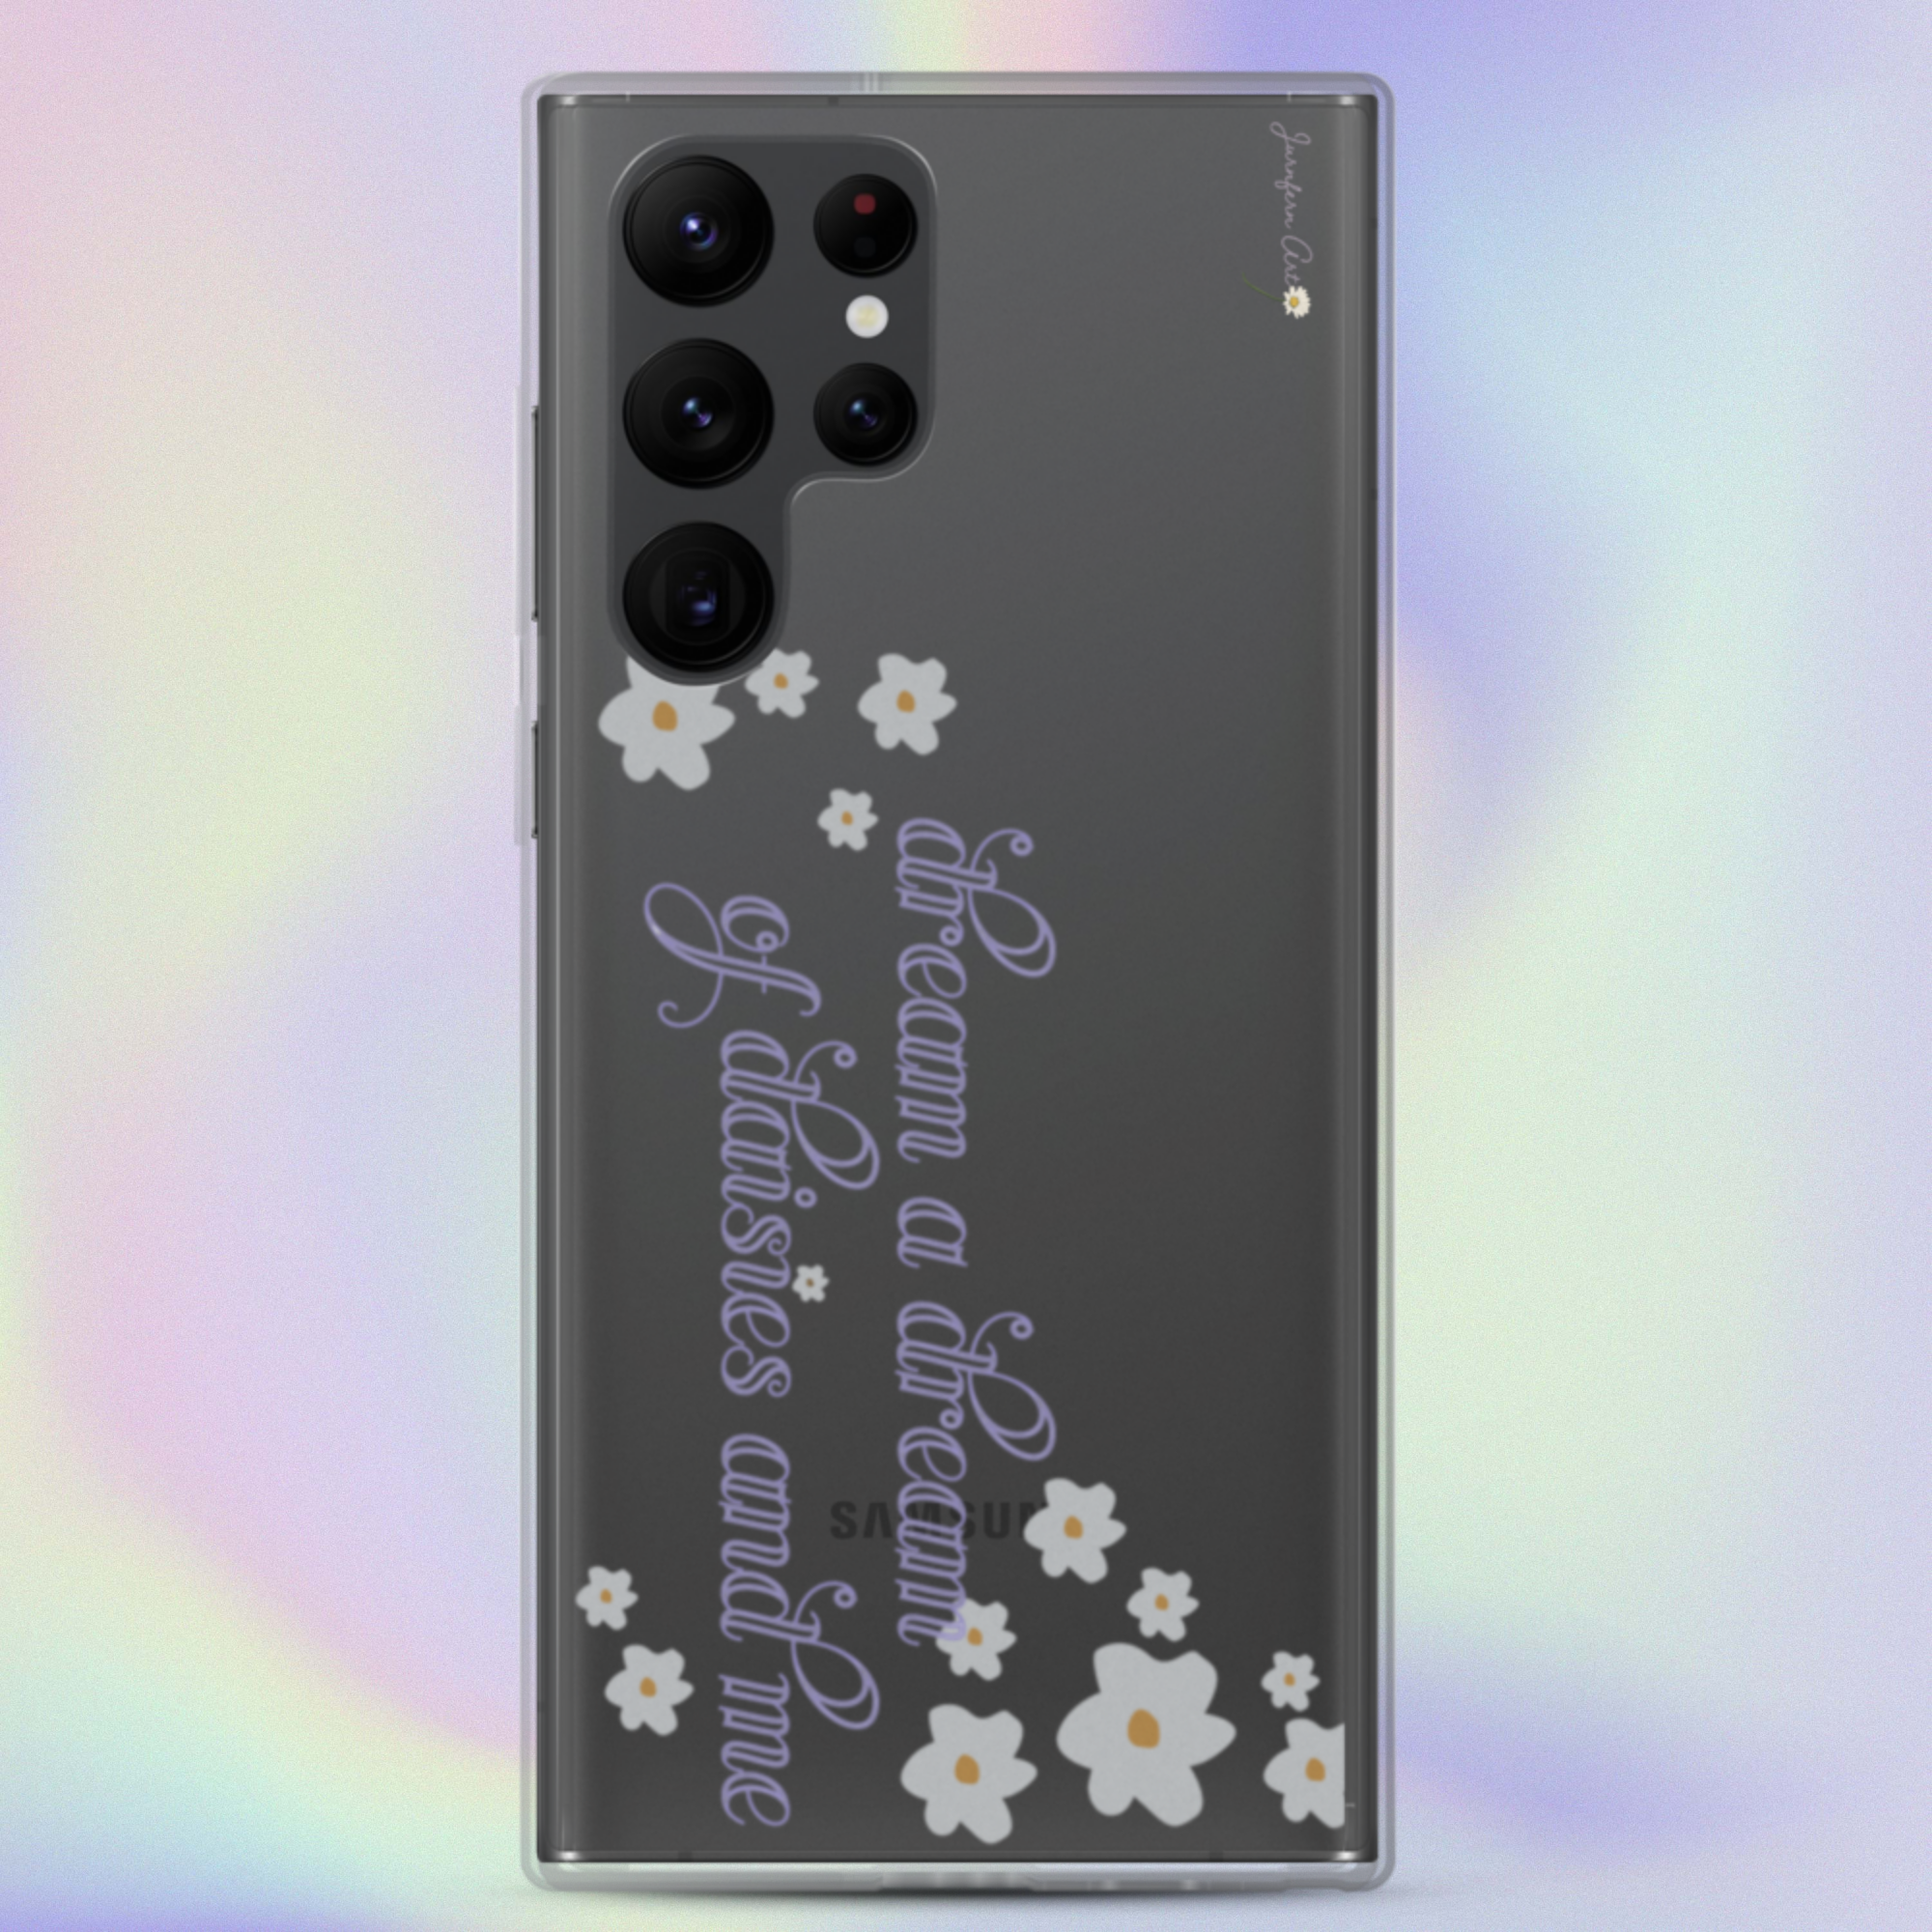 A transparent Samsung Galaxy S22 Ultra phone case with cursive lavender text on it that reads "dream a dream of daisies and me" surrounded by small daisies